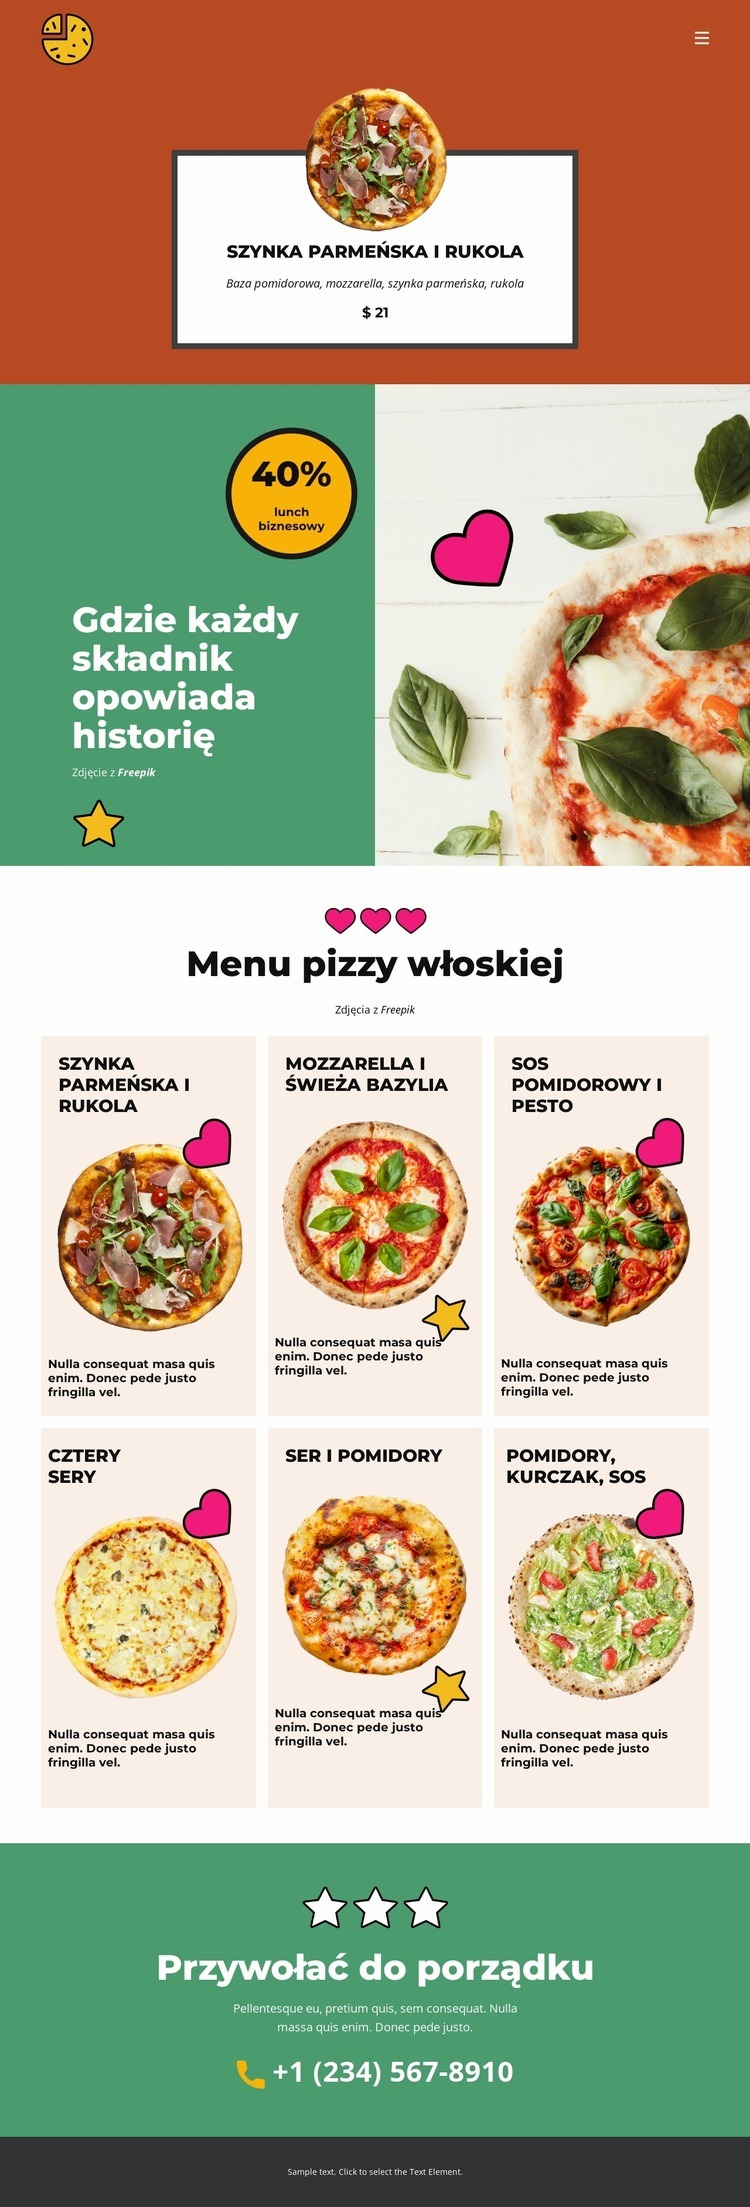 Fun Facts about Pizza Wstęp